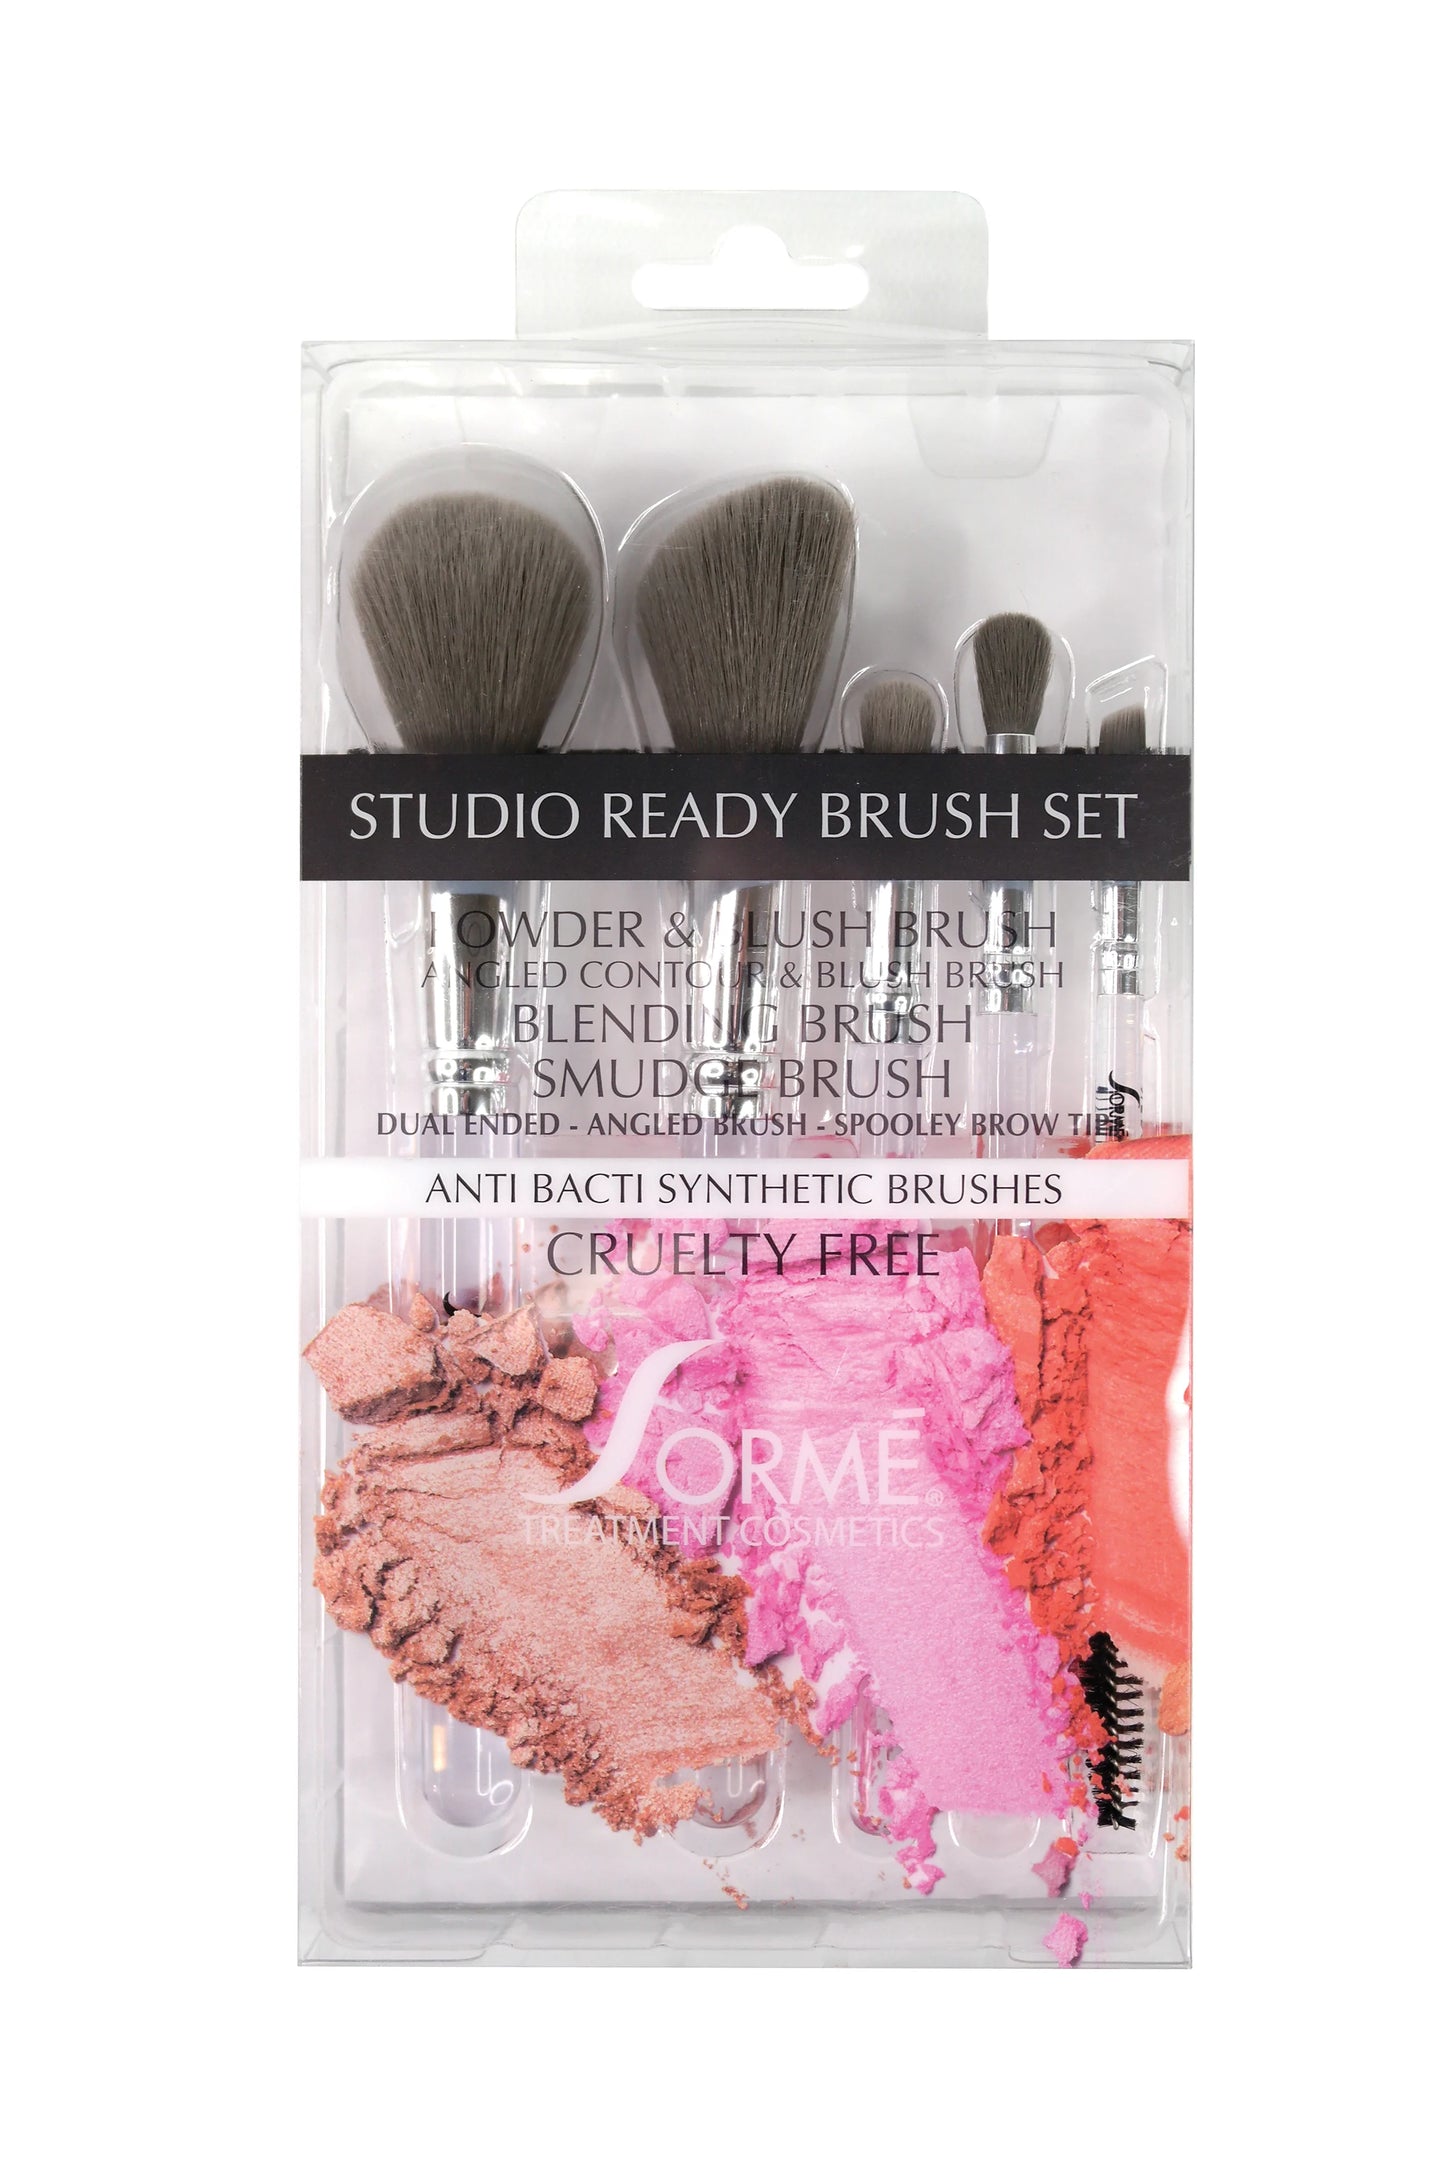 SORMÉ Anti Bacterial Synthetic Cruelty Free Makeup Brushes